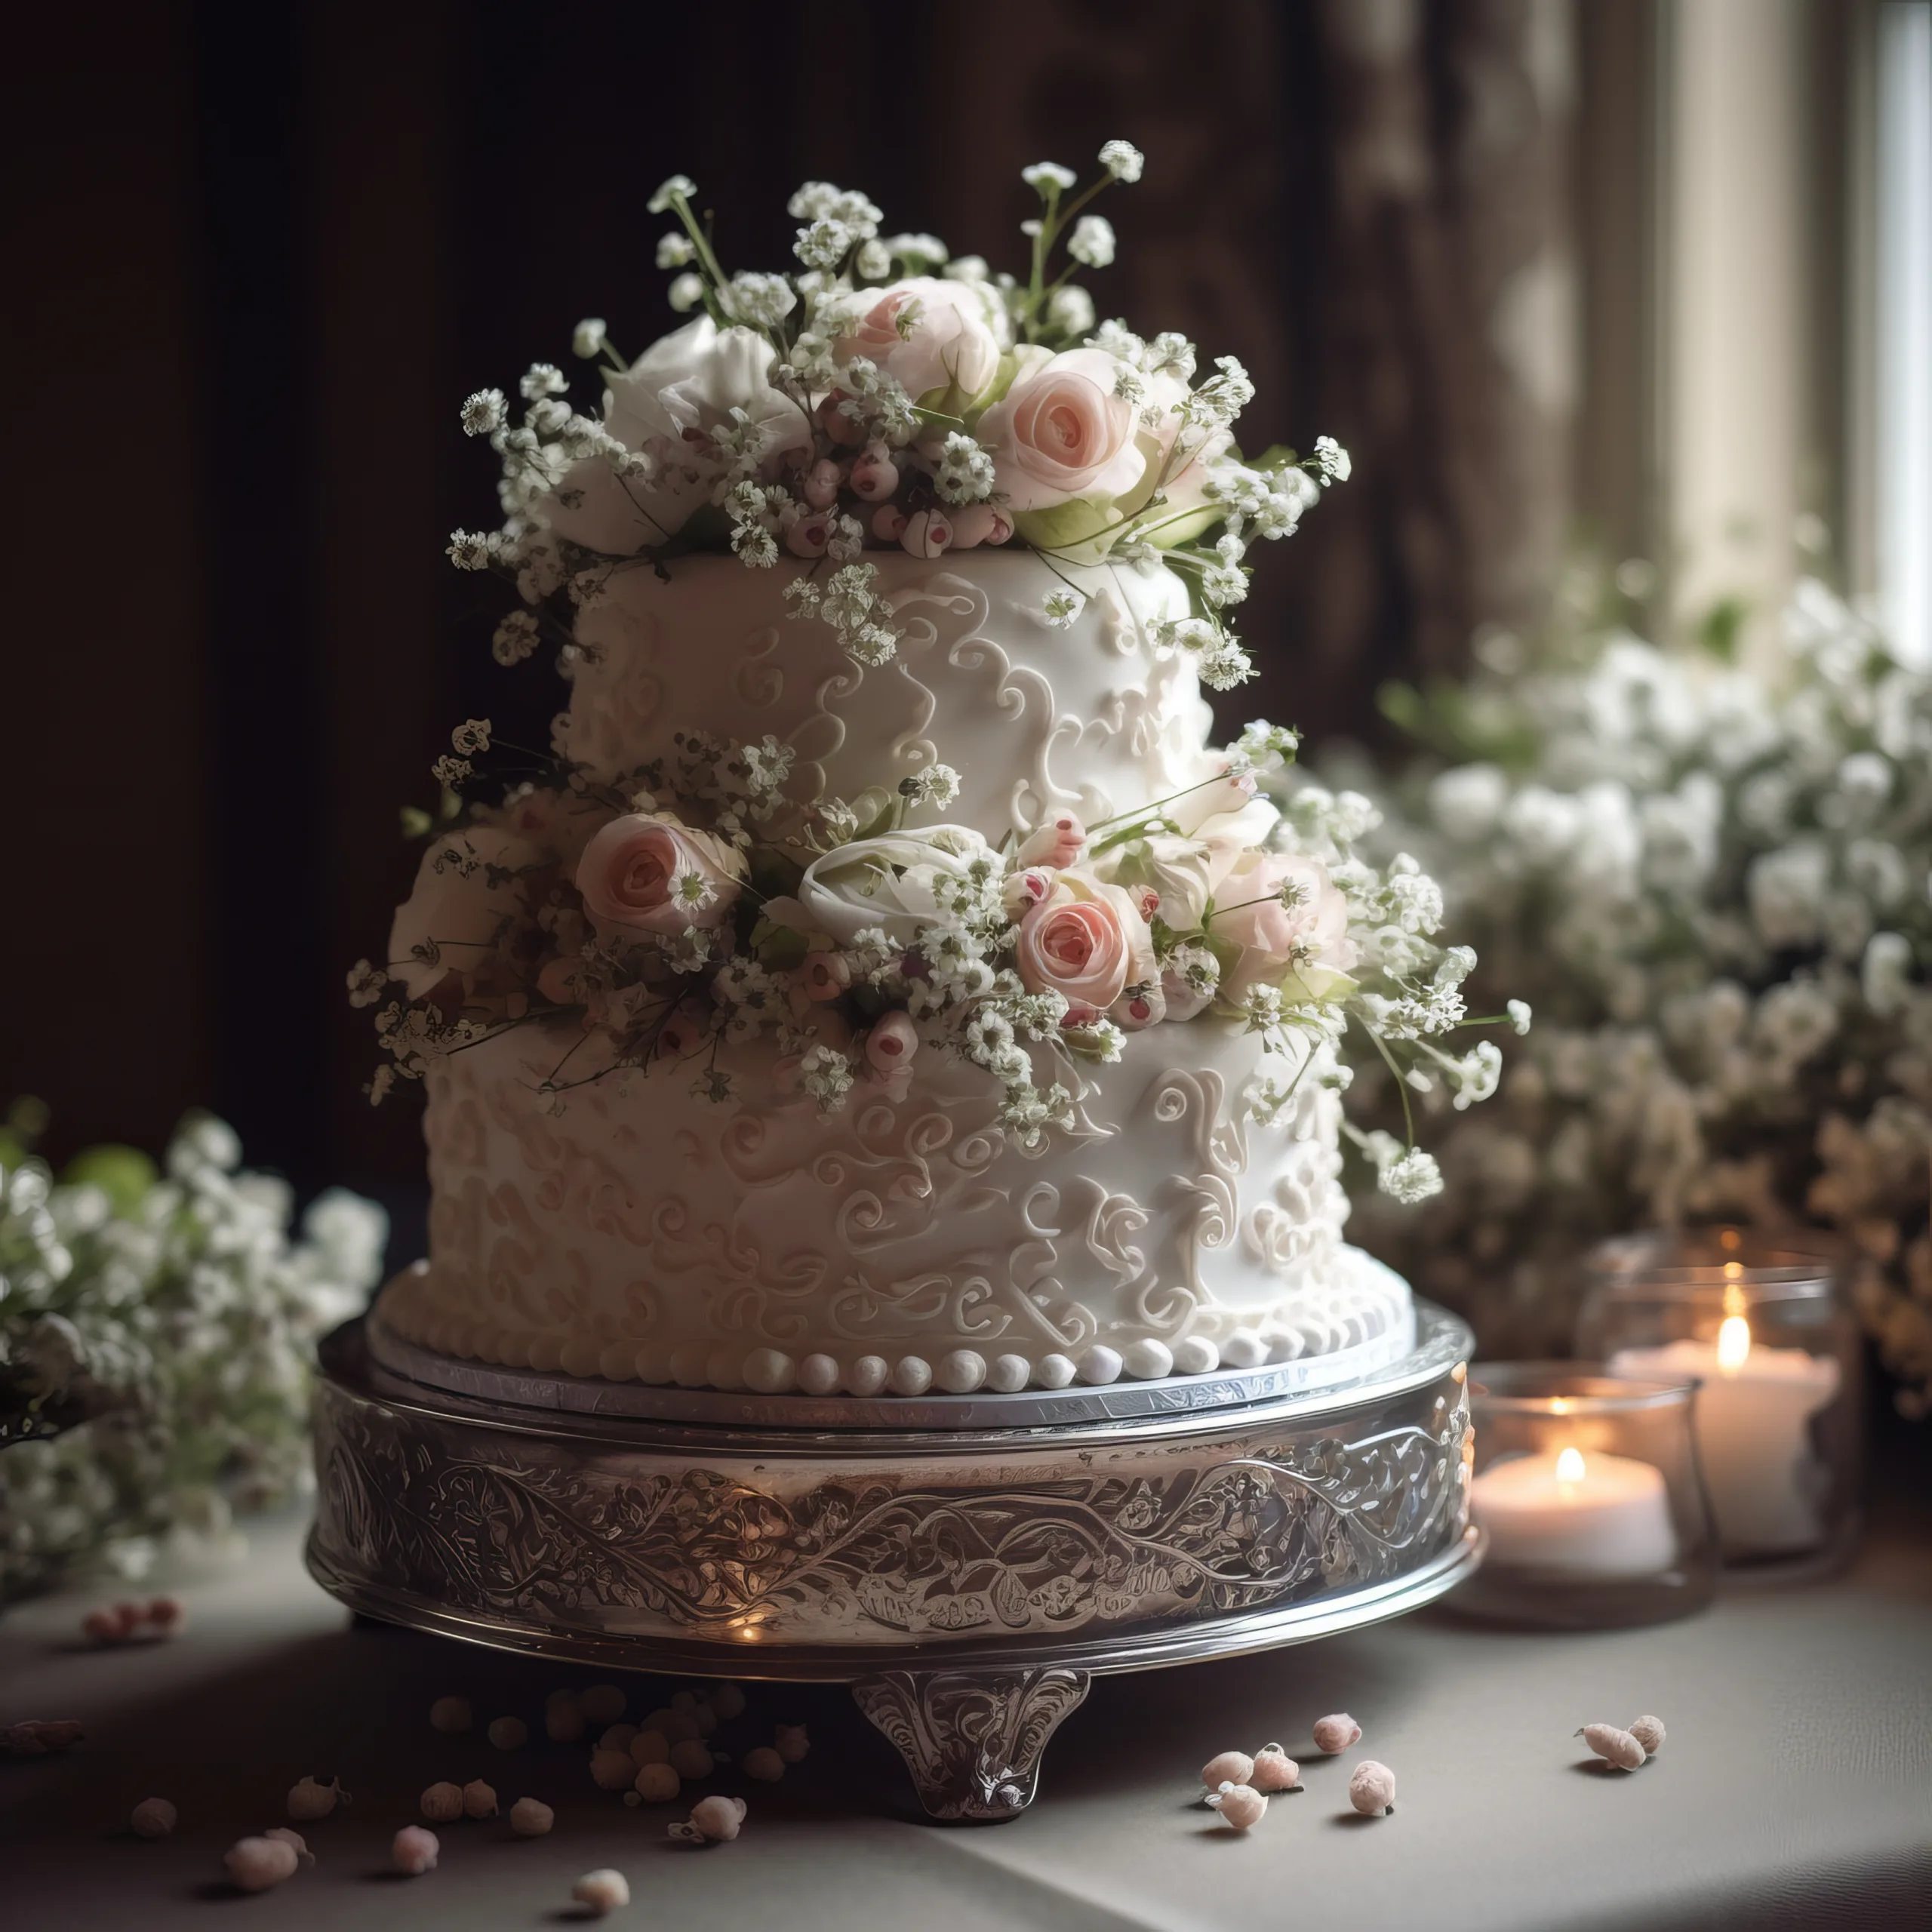 A white wedding cake with flowers on top at Wick farm Bath